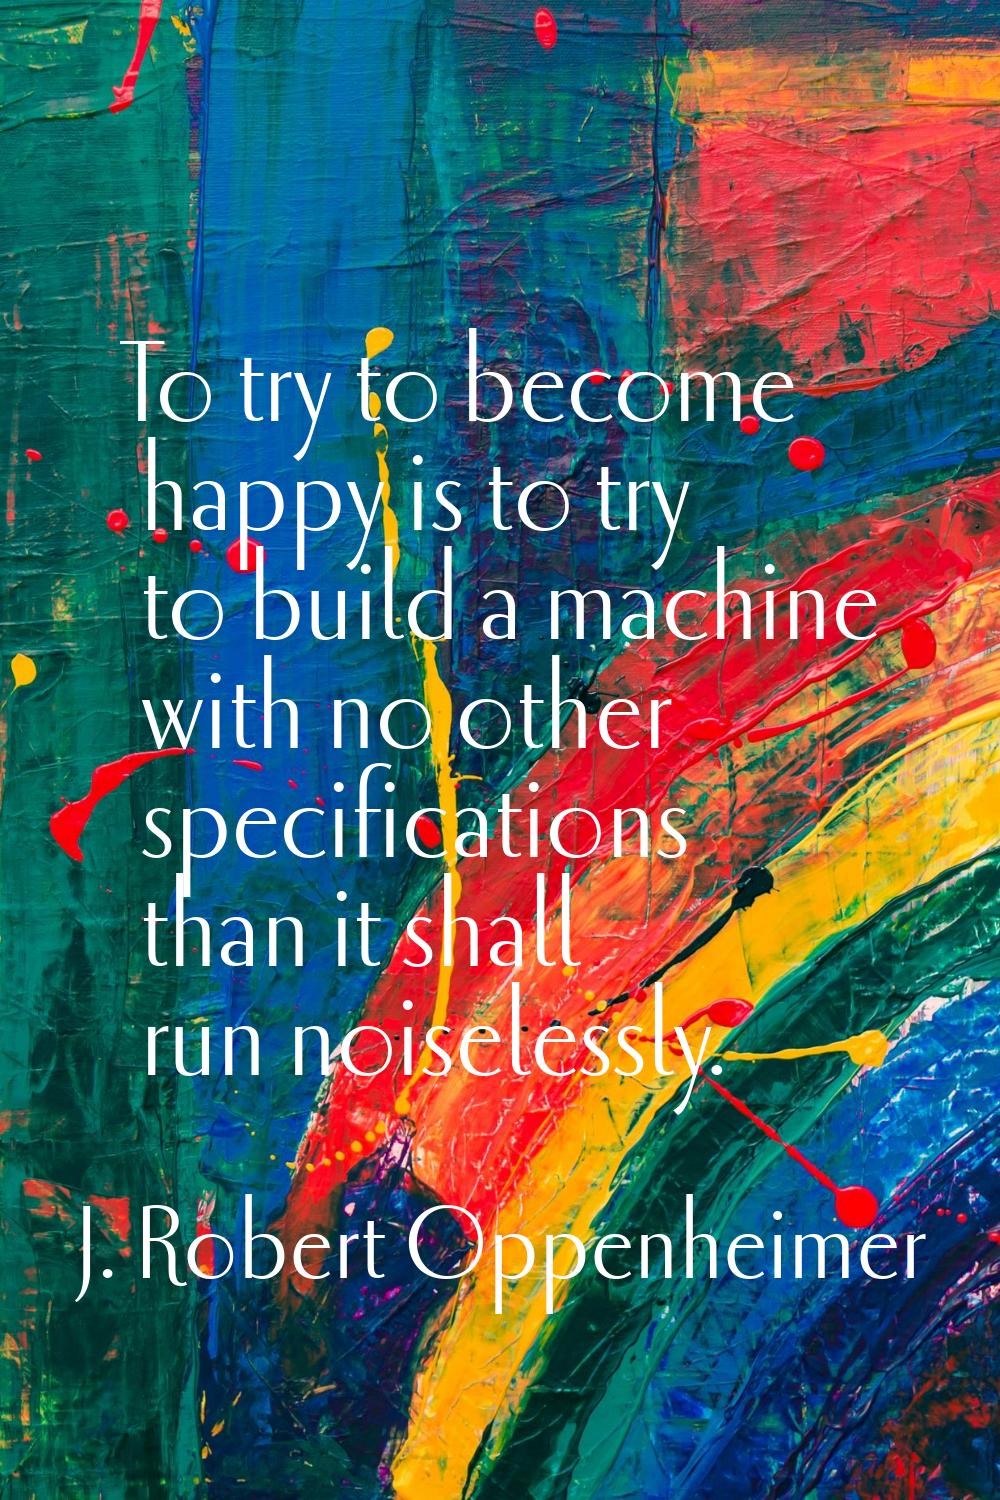 To try to become happy is to try to build a machine with no other specifications than it shall run 